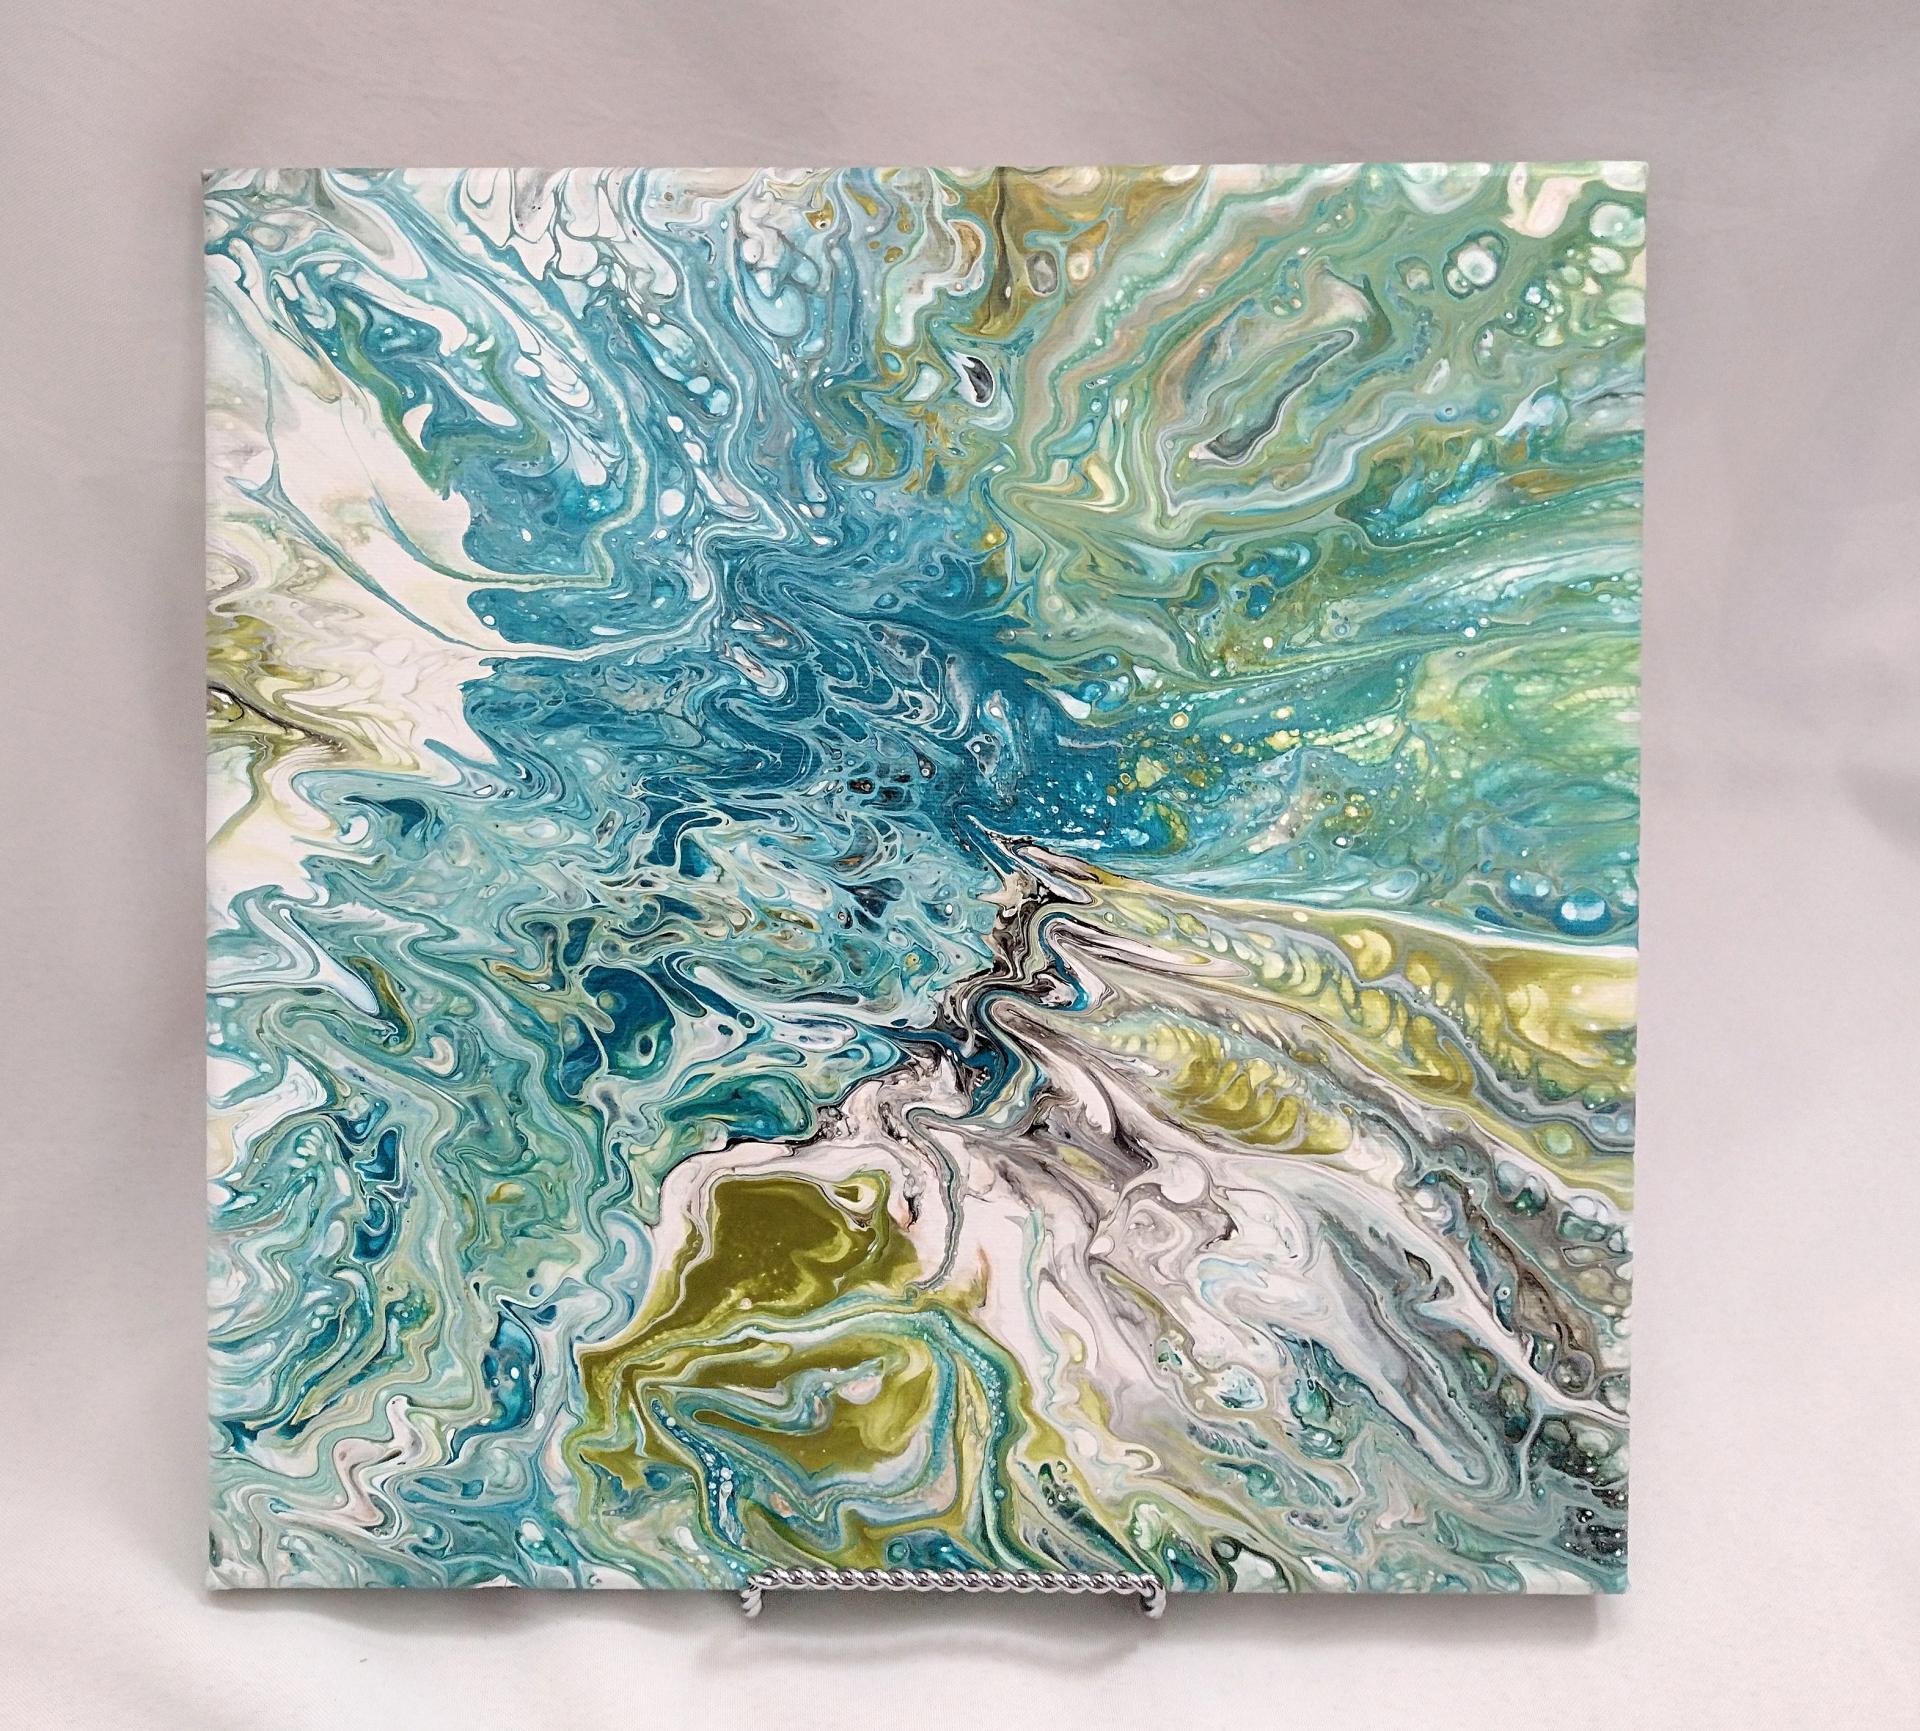 Green and Blue Abstract Original Acrylic Pour Painting, 12 x 12, Fluid  Art Painting